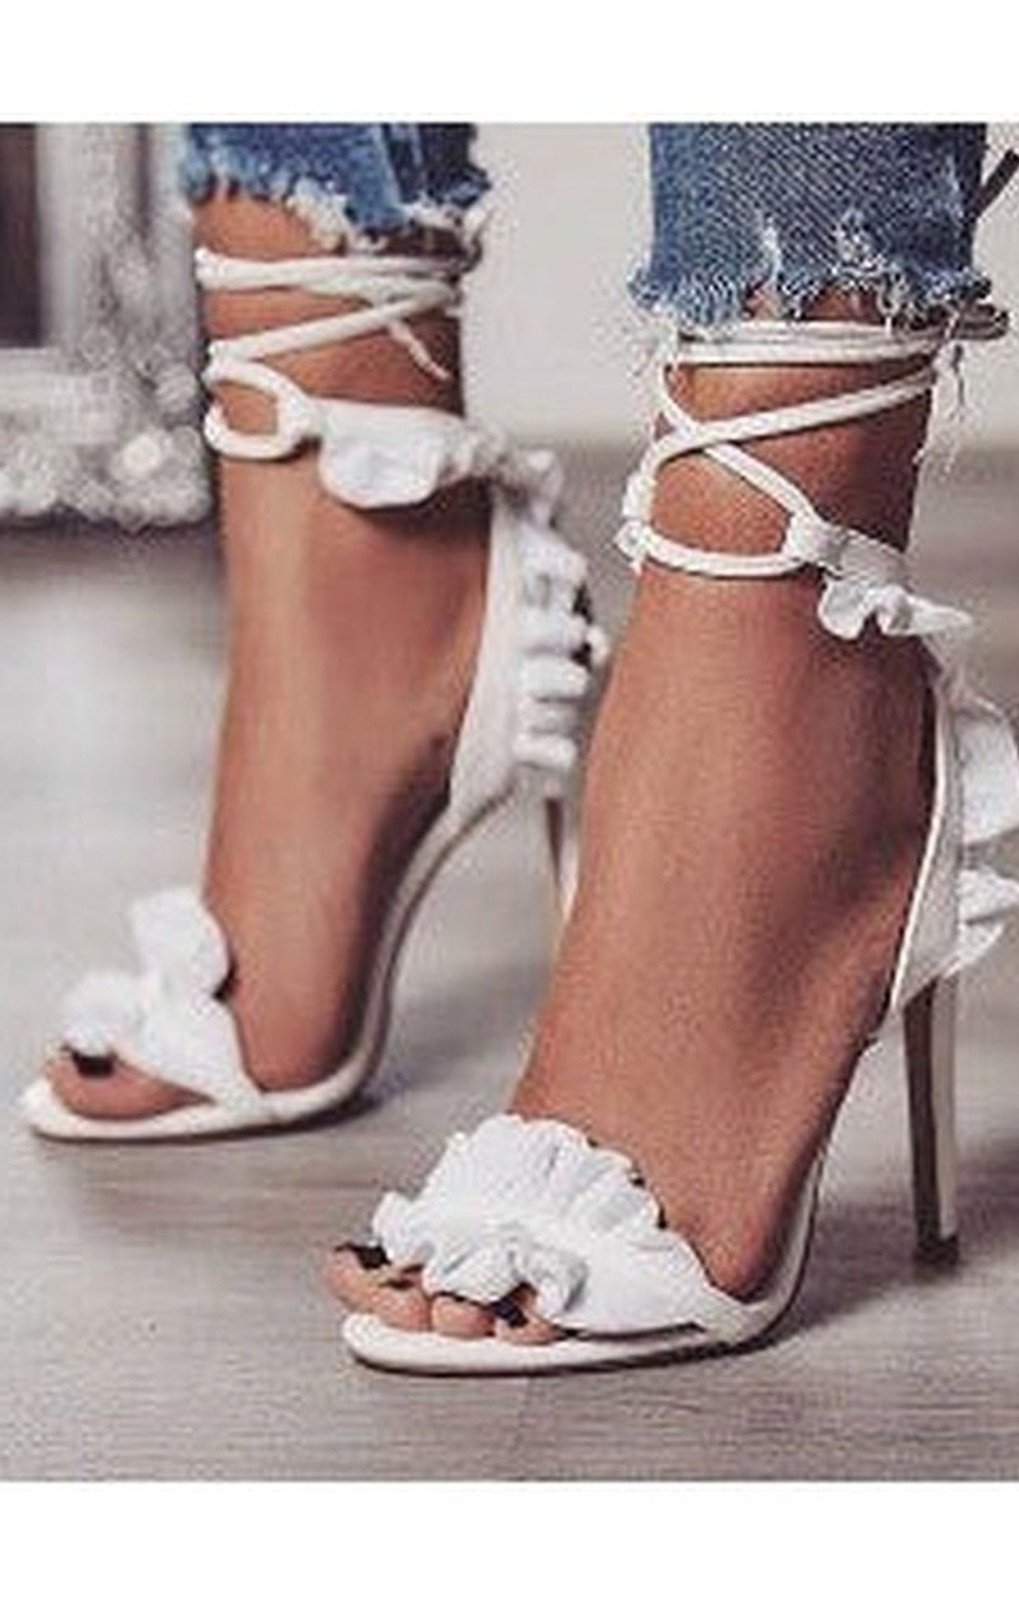 Ruffled Lace High Heels Sandals Shoes